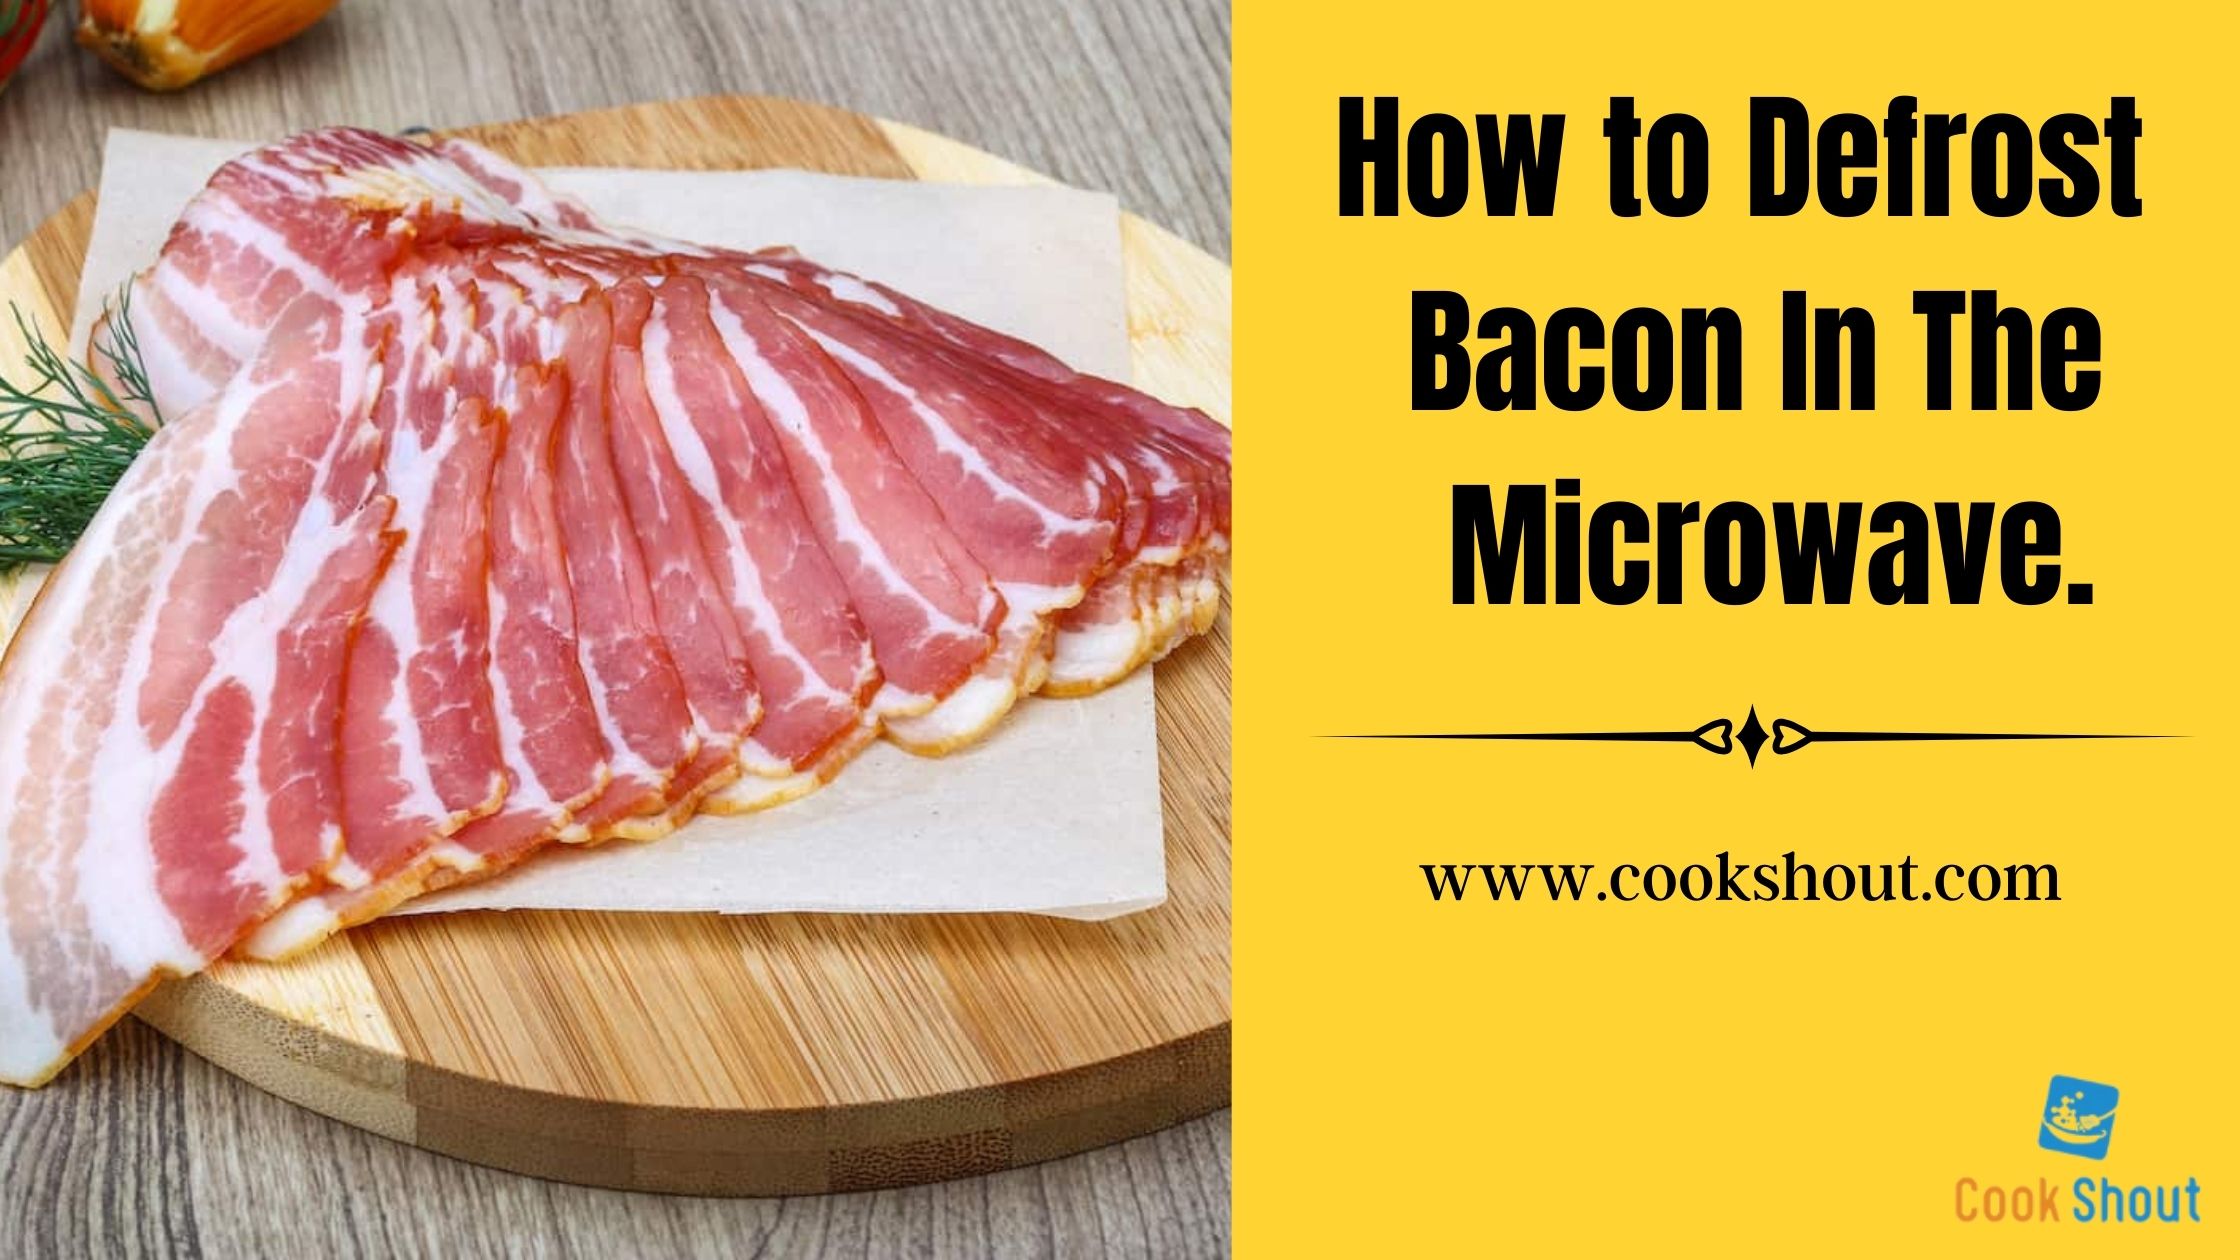 How to Defrost Bacon In The Microwave